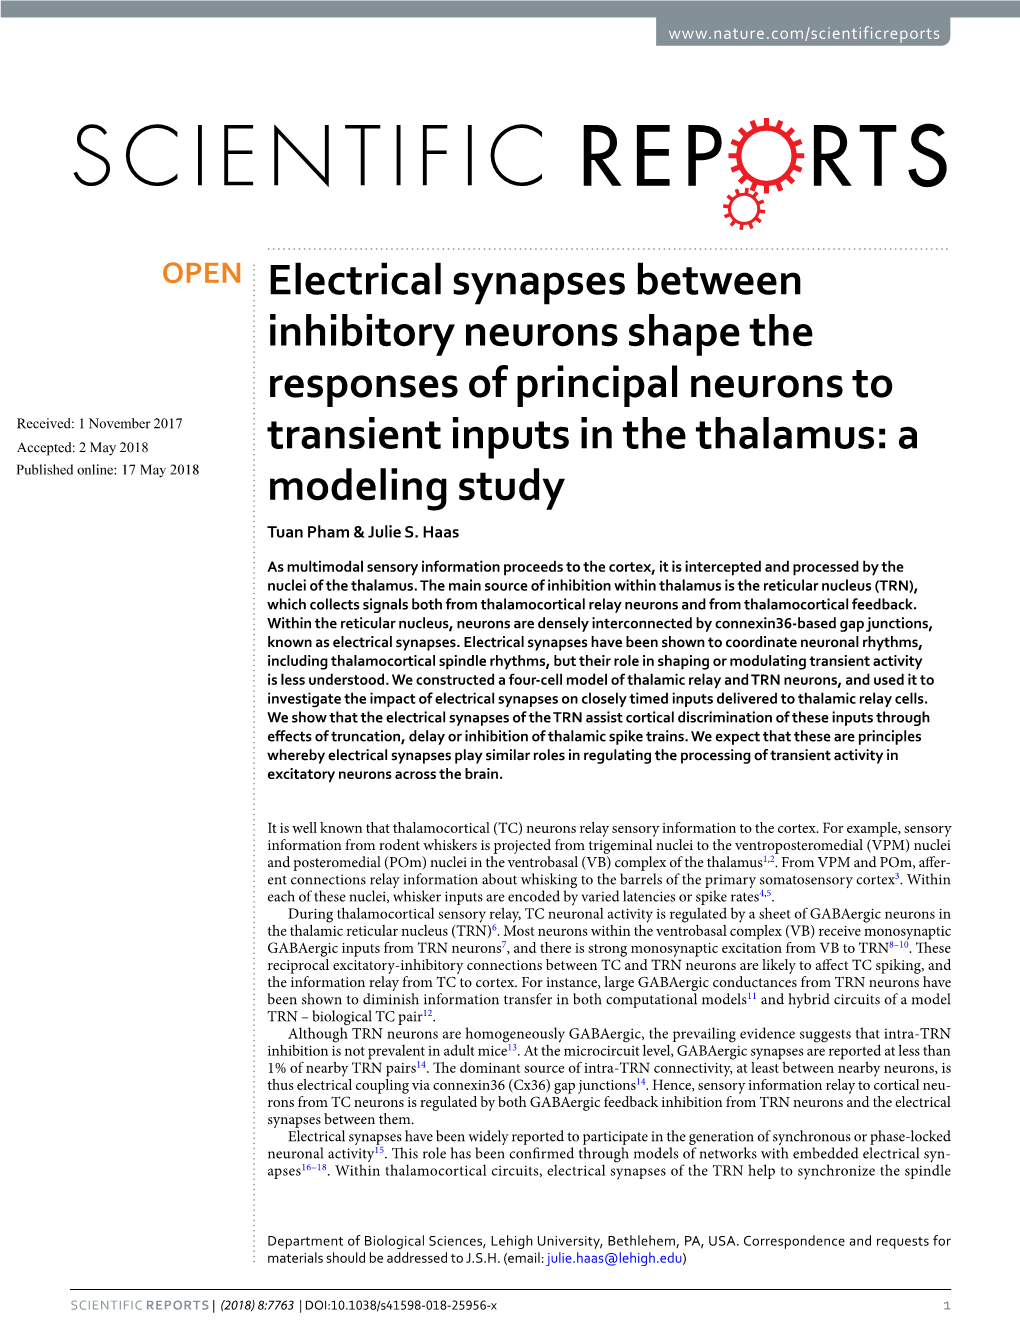 Electrical Synapses Between Inhibitory Neurons Shape The